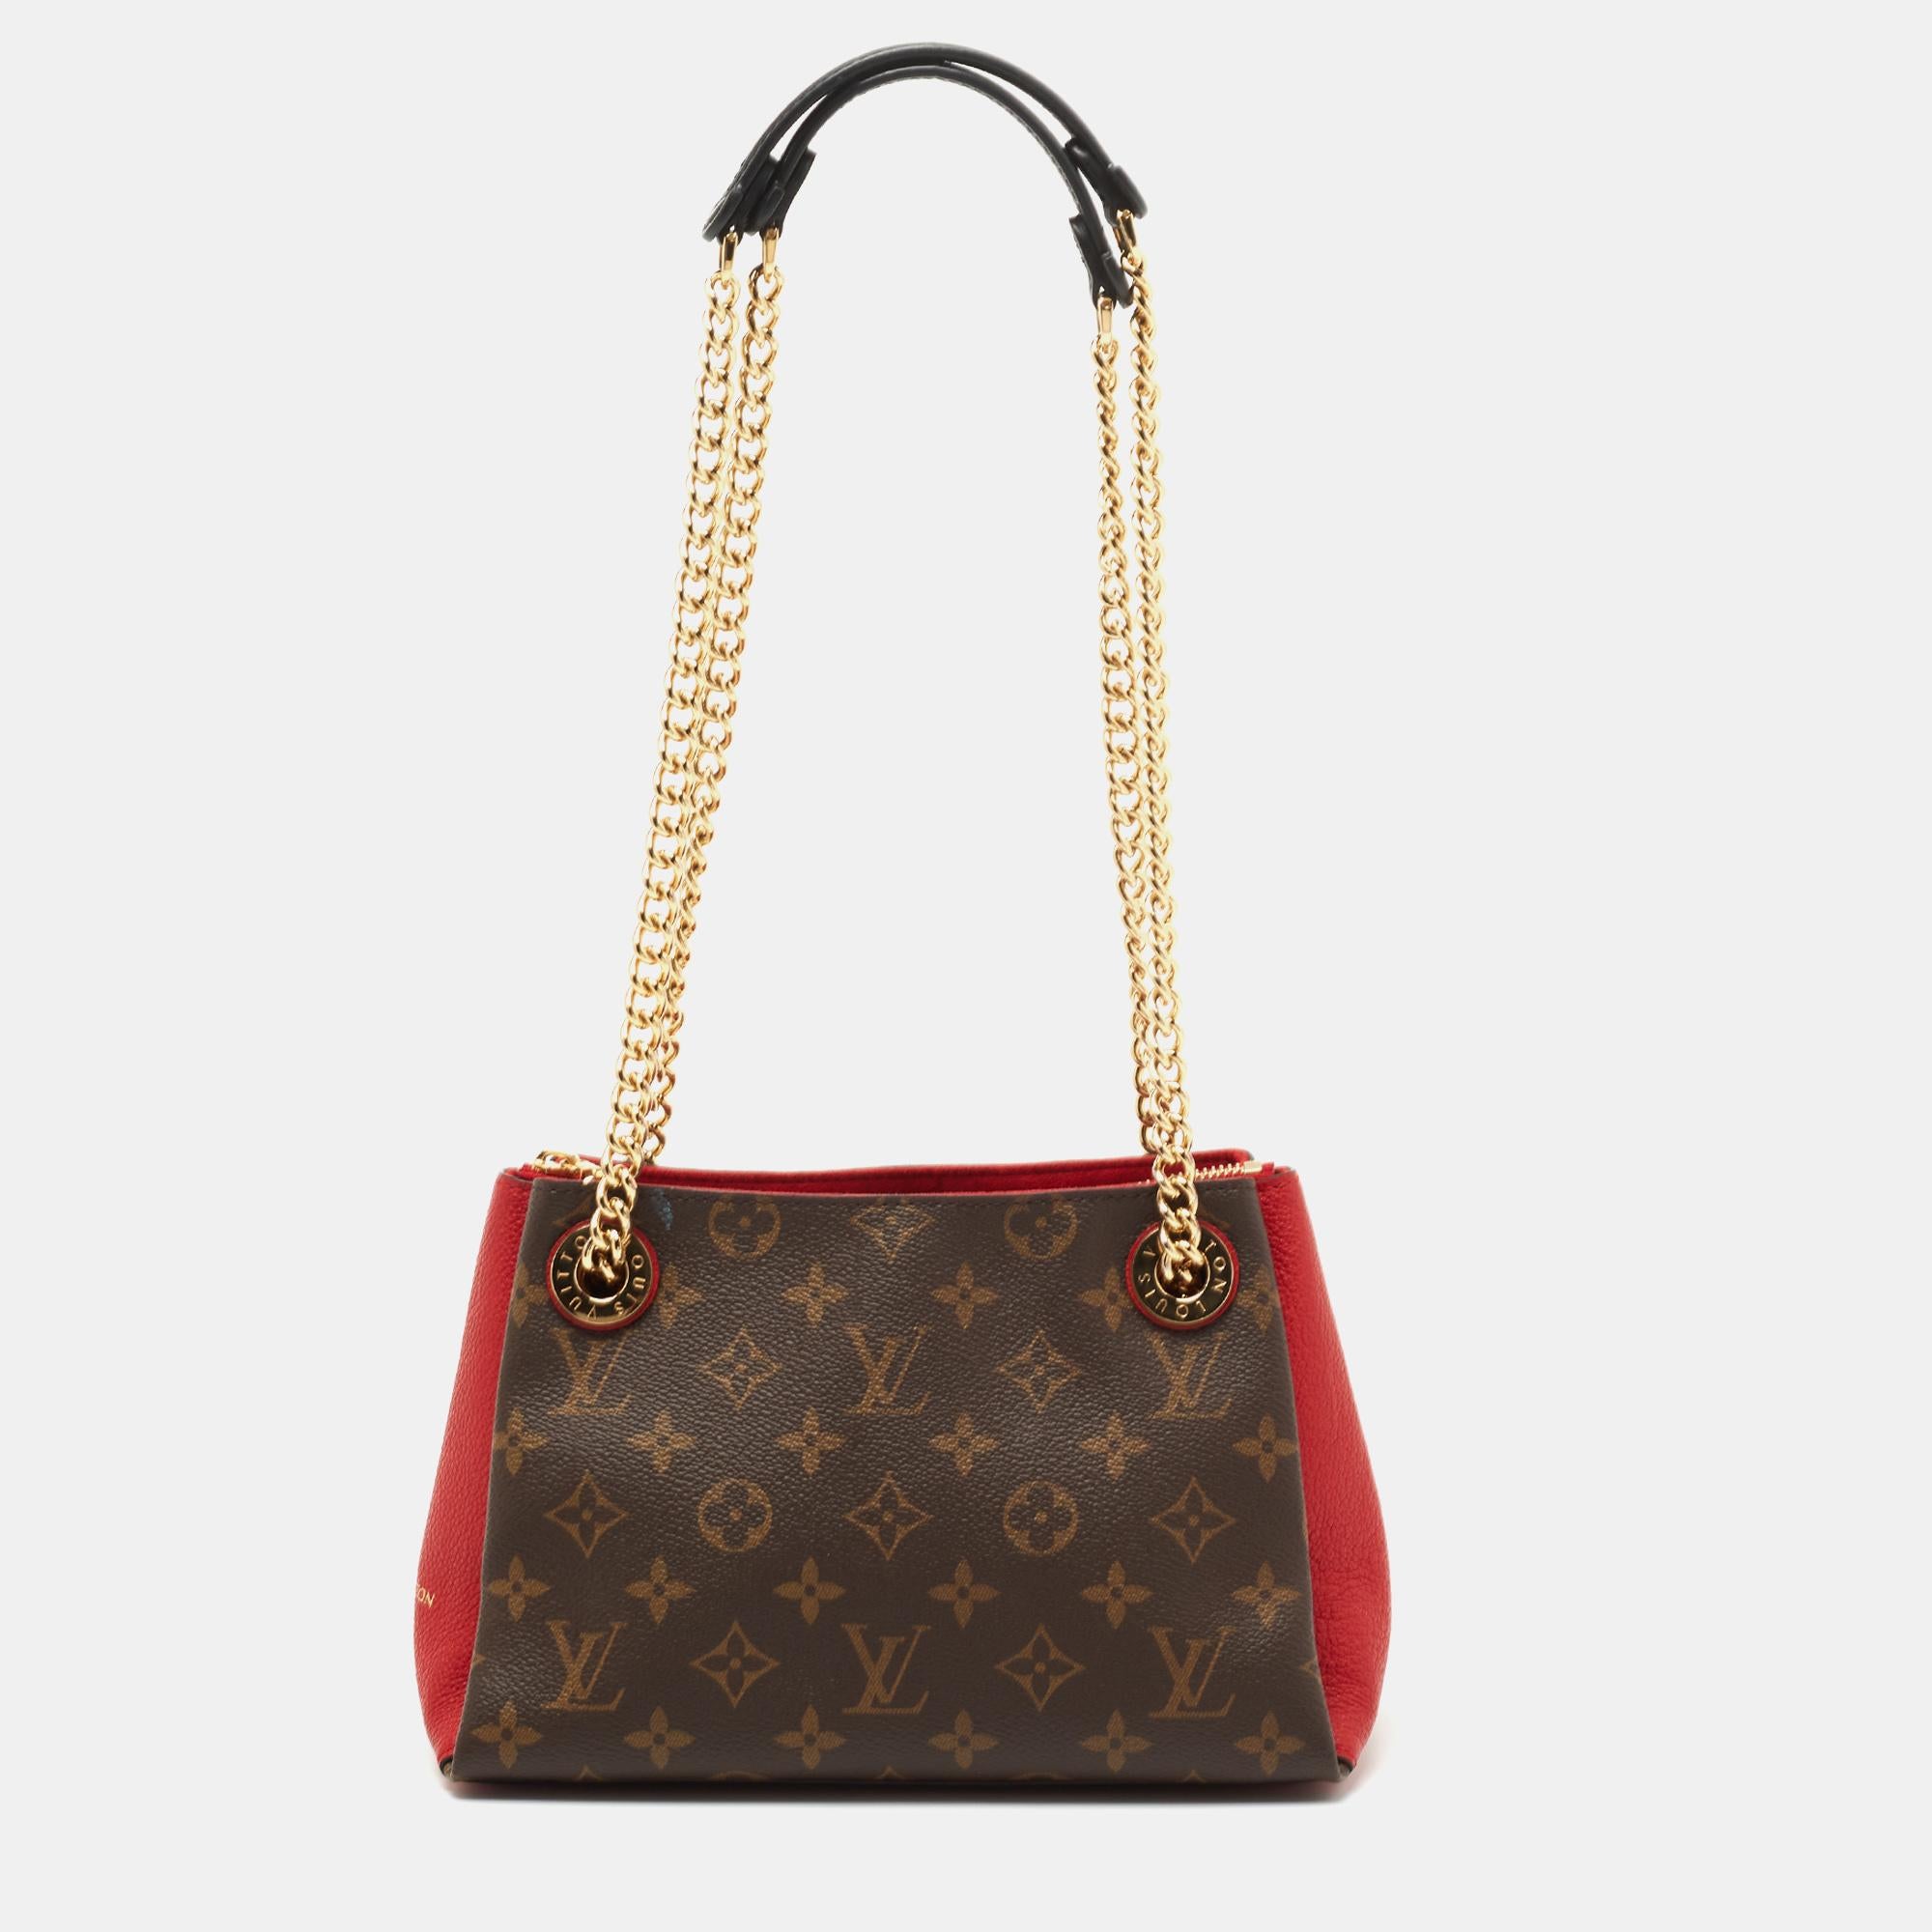 Get style and carry your essentials with ease using this LV shoulder bag. It has been crafted using high-quality materials to be a standout accessory.

